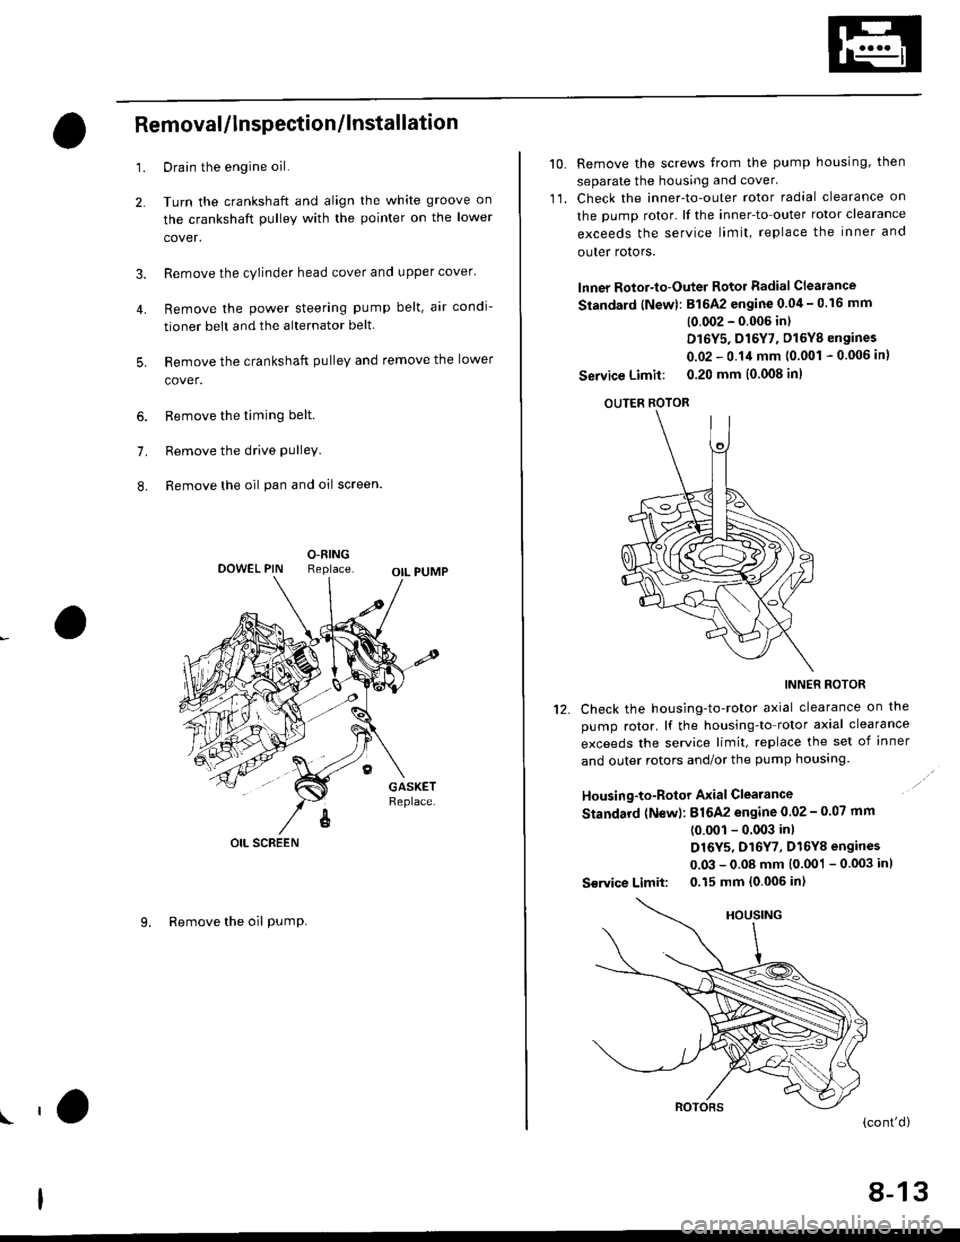 HONDA CIVIC 1998 6.G Owners Manual 4.
Removal/lnspection/lnstallation
2.
3.
1.
5.
6.
1.
8.
Drain the engine oil.
Turn the crankshaft and align the white groove on
the crankshaft pulley with the pointer on the lower
cover.
Remove the cy